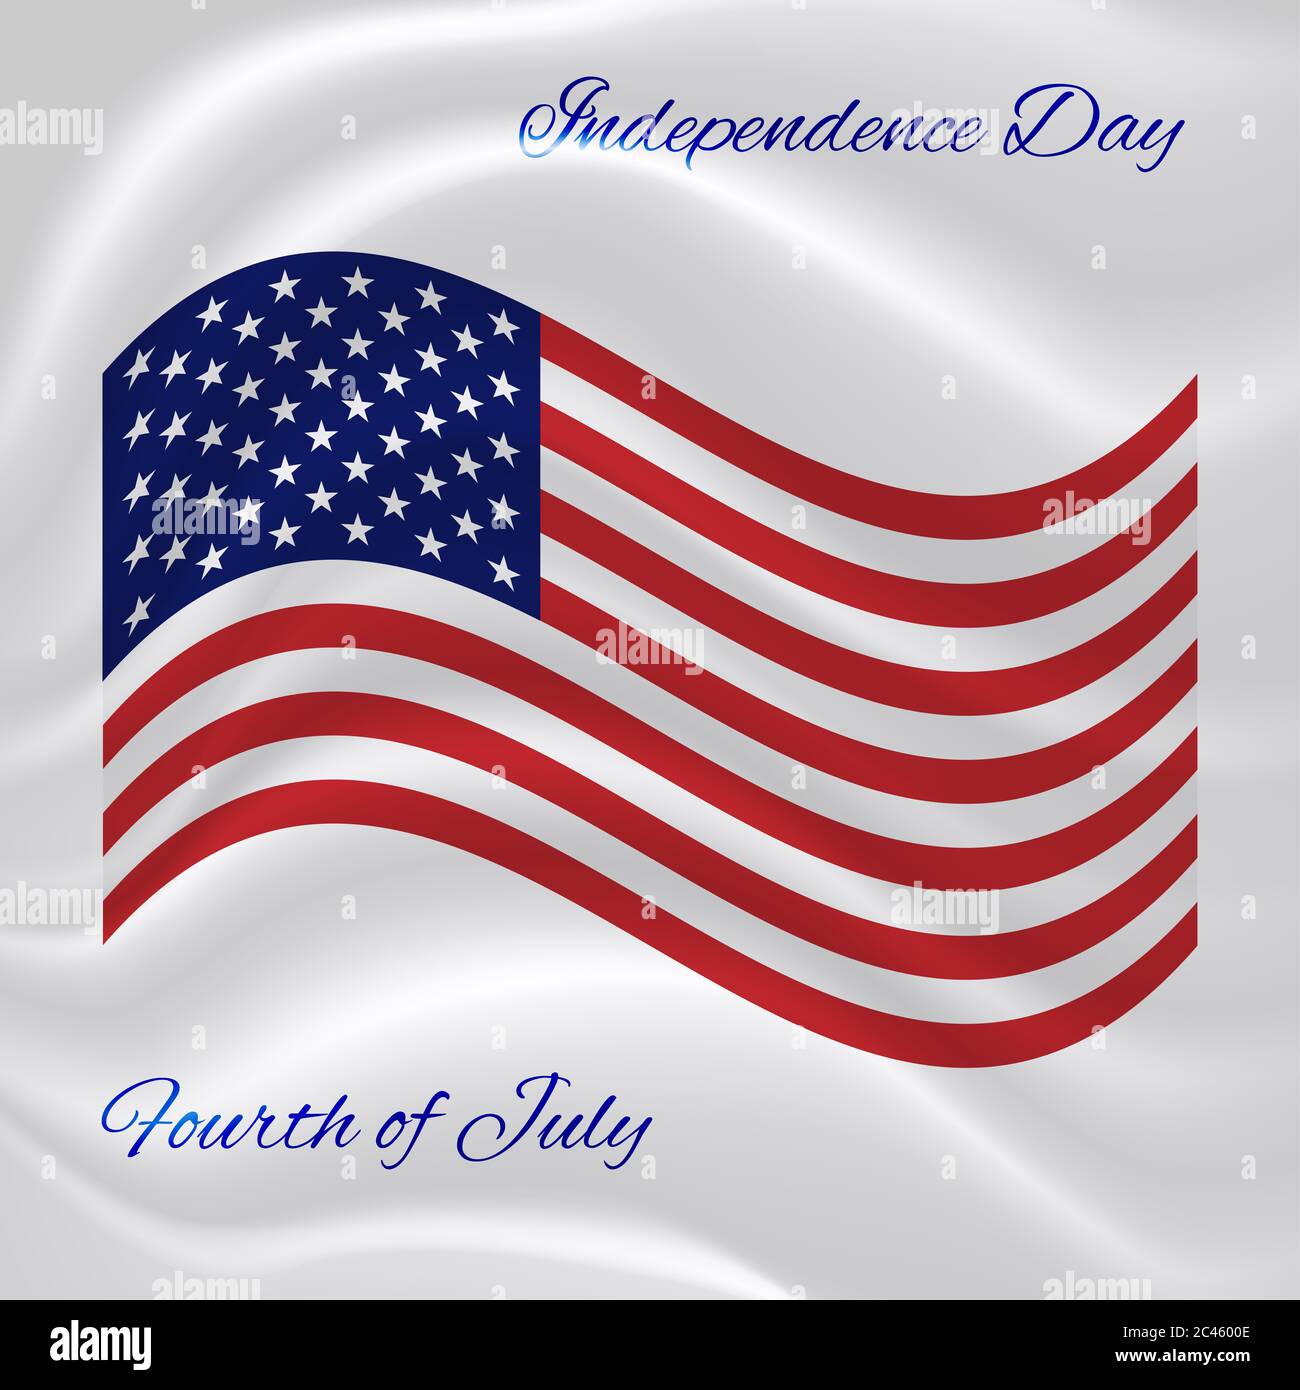 Vector illustration of a flying American flag on a white silk background with the inscription July 4th Independence Day. Stock Photo